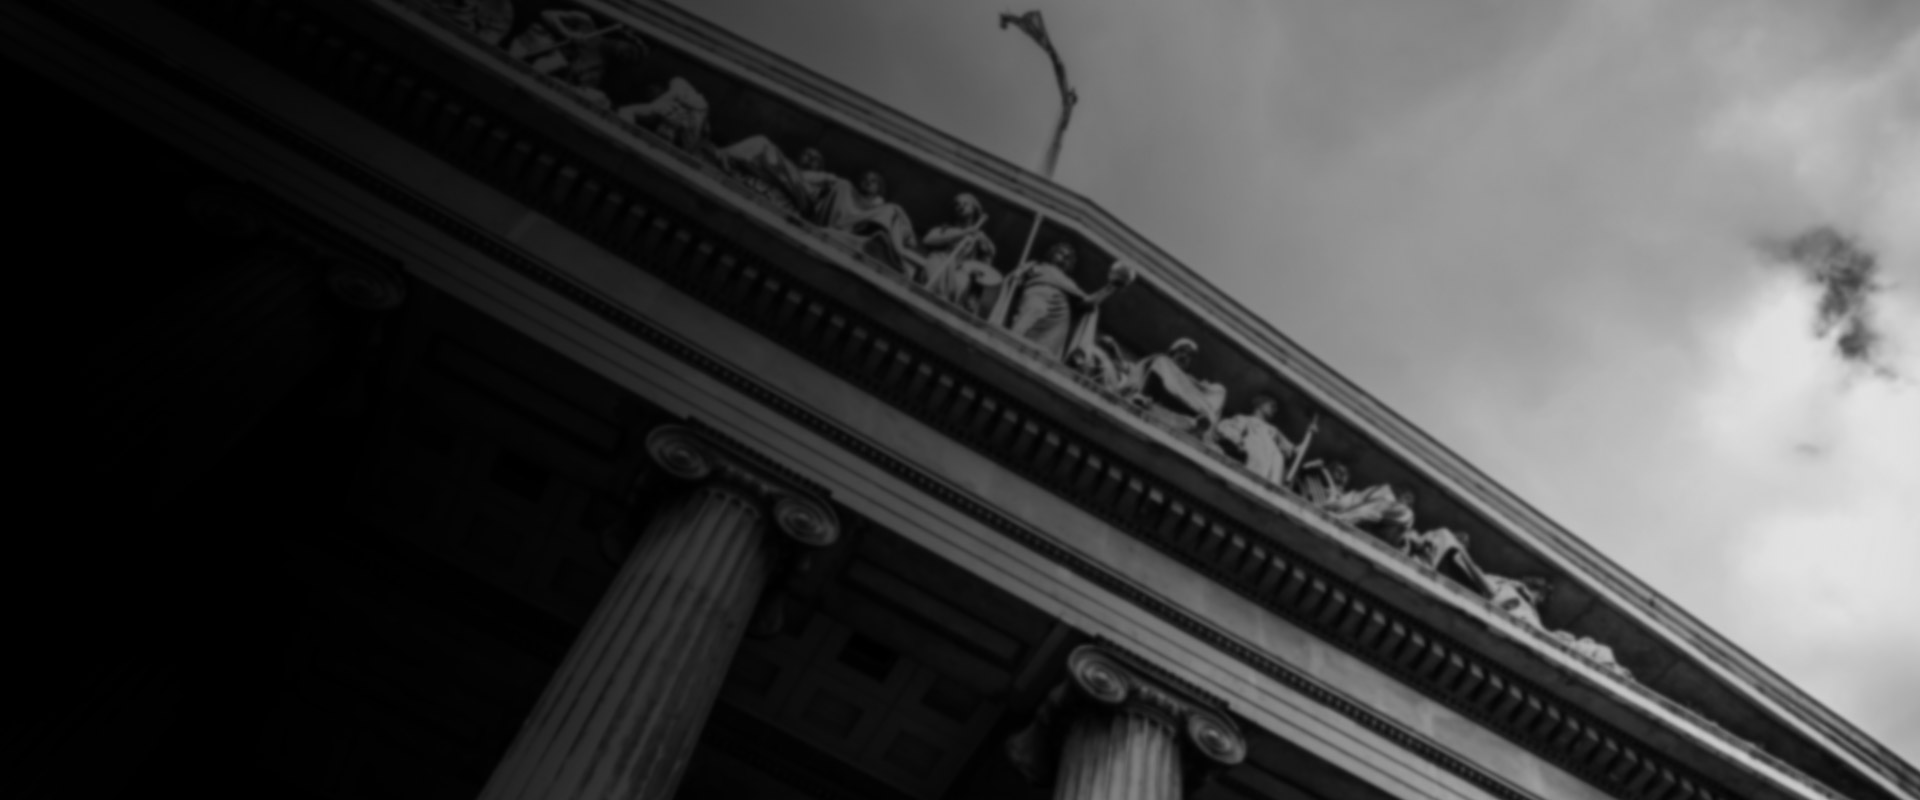 The hero image features the imposing Greek columns of a courthouse, emblematic of Get It Done Law's robust commitment to upholding the law and delivering justice. As a leading legal firm, we stand for integrity, stability, and the unwavering pursuit of our clients' best interests